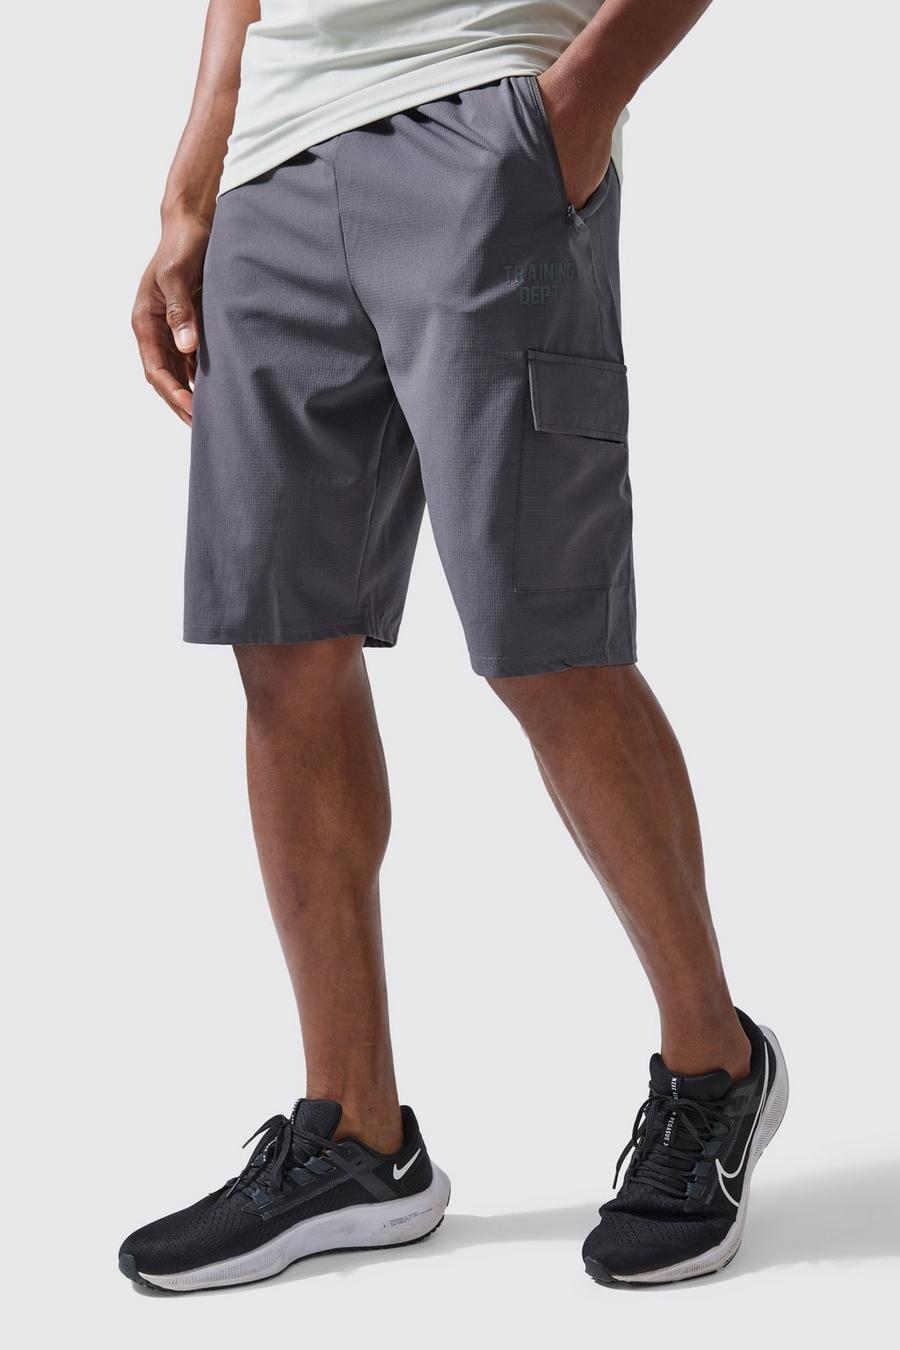 Tall Active Training Dept Cargo-Shorts, Charcoal gris